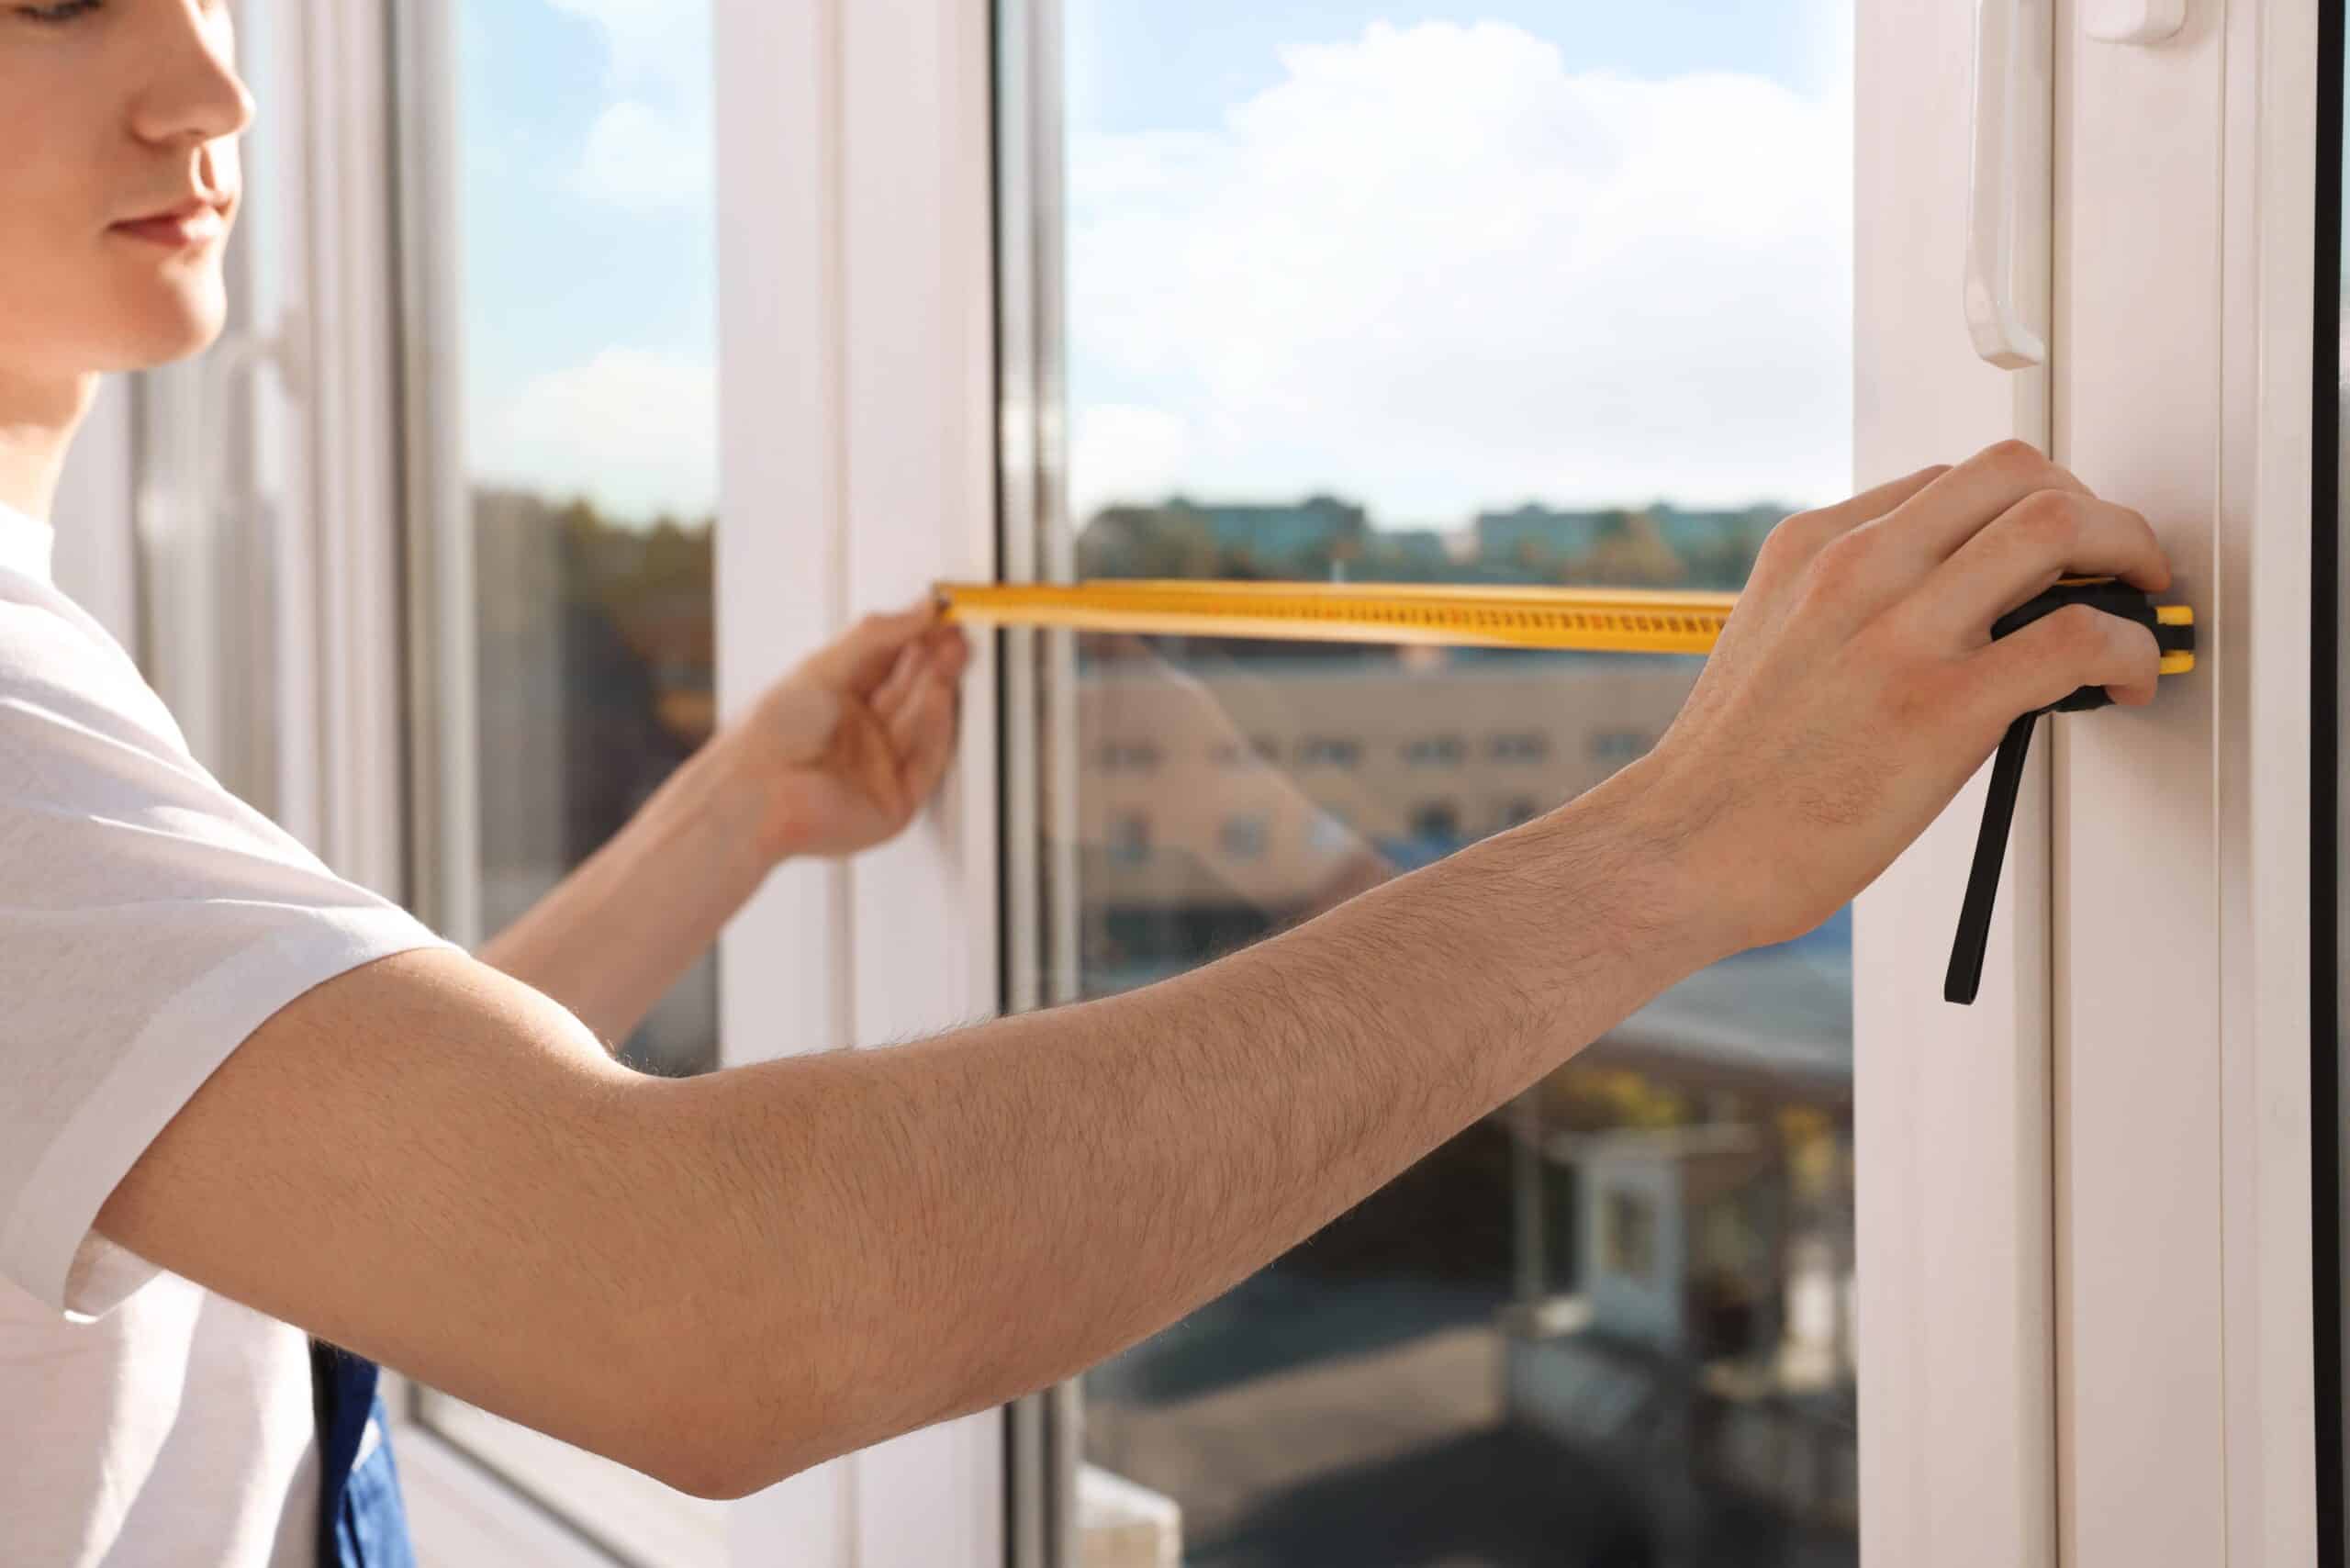 Hands measuring window with tape measure